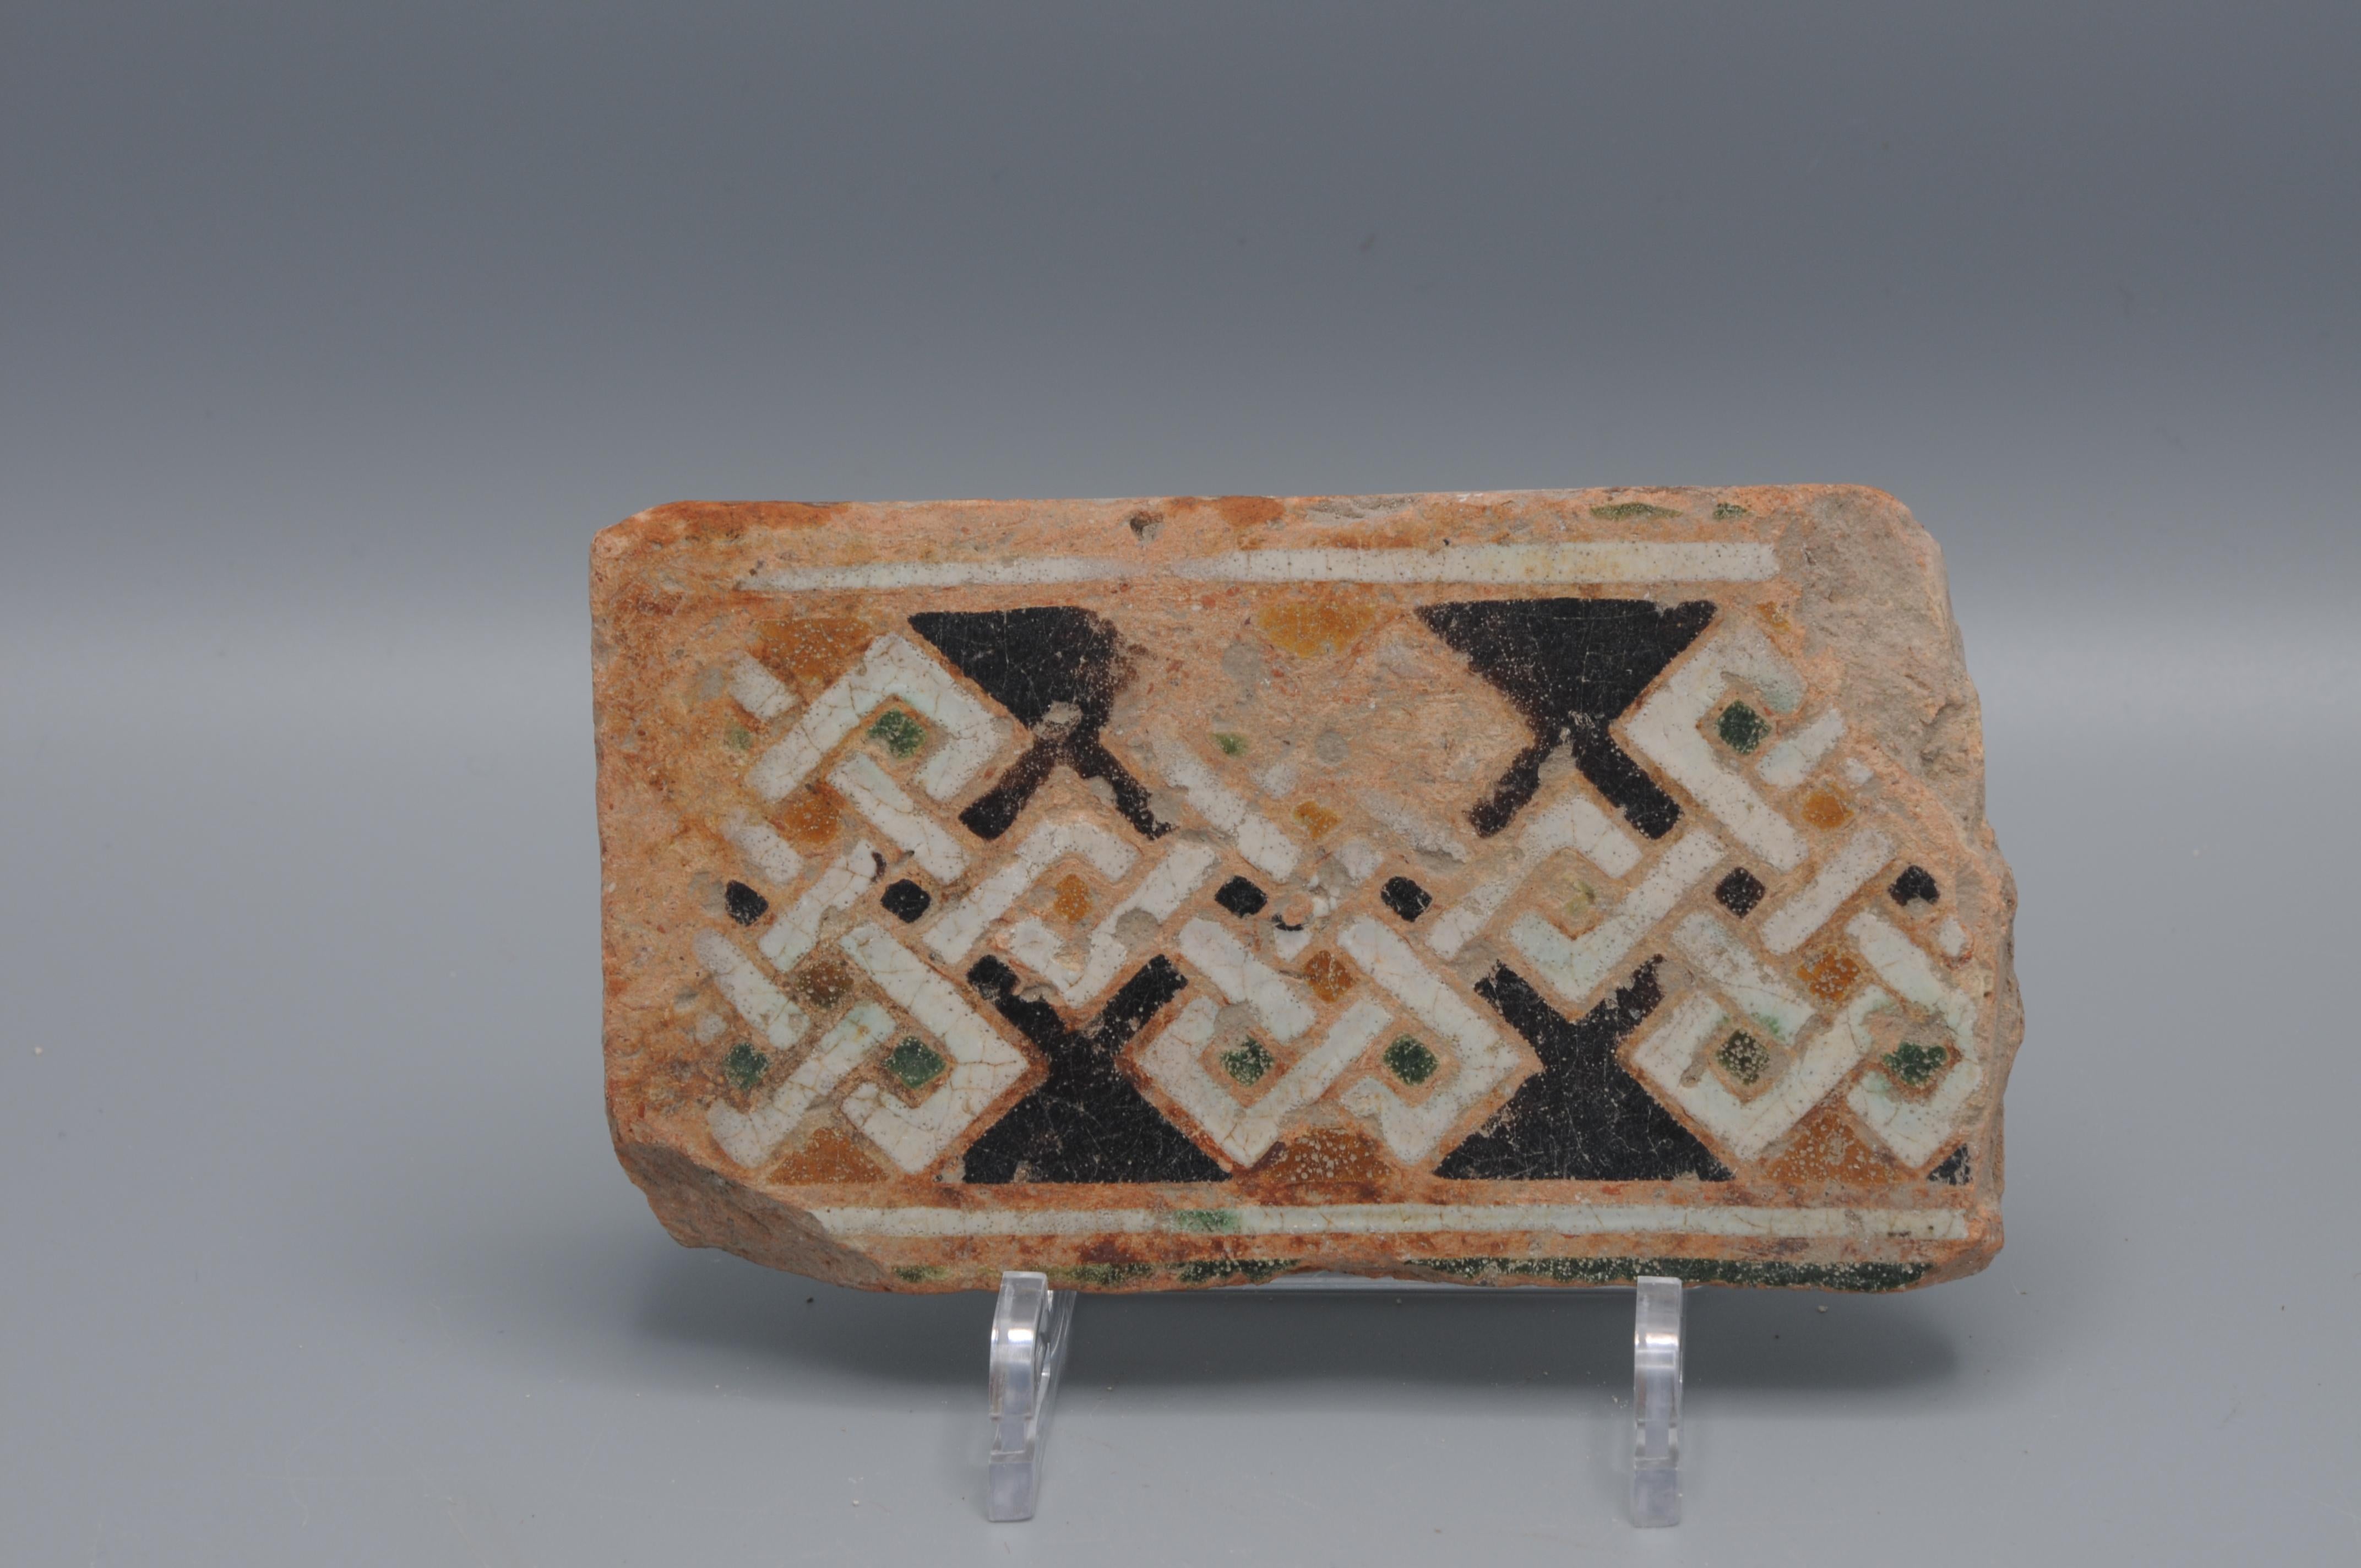 Early Arabe / Mudejar style tile with geometric decoration, made late 15th century.

